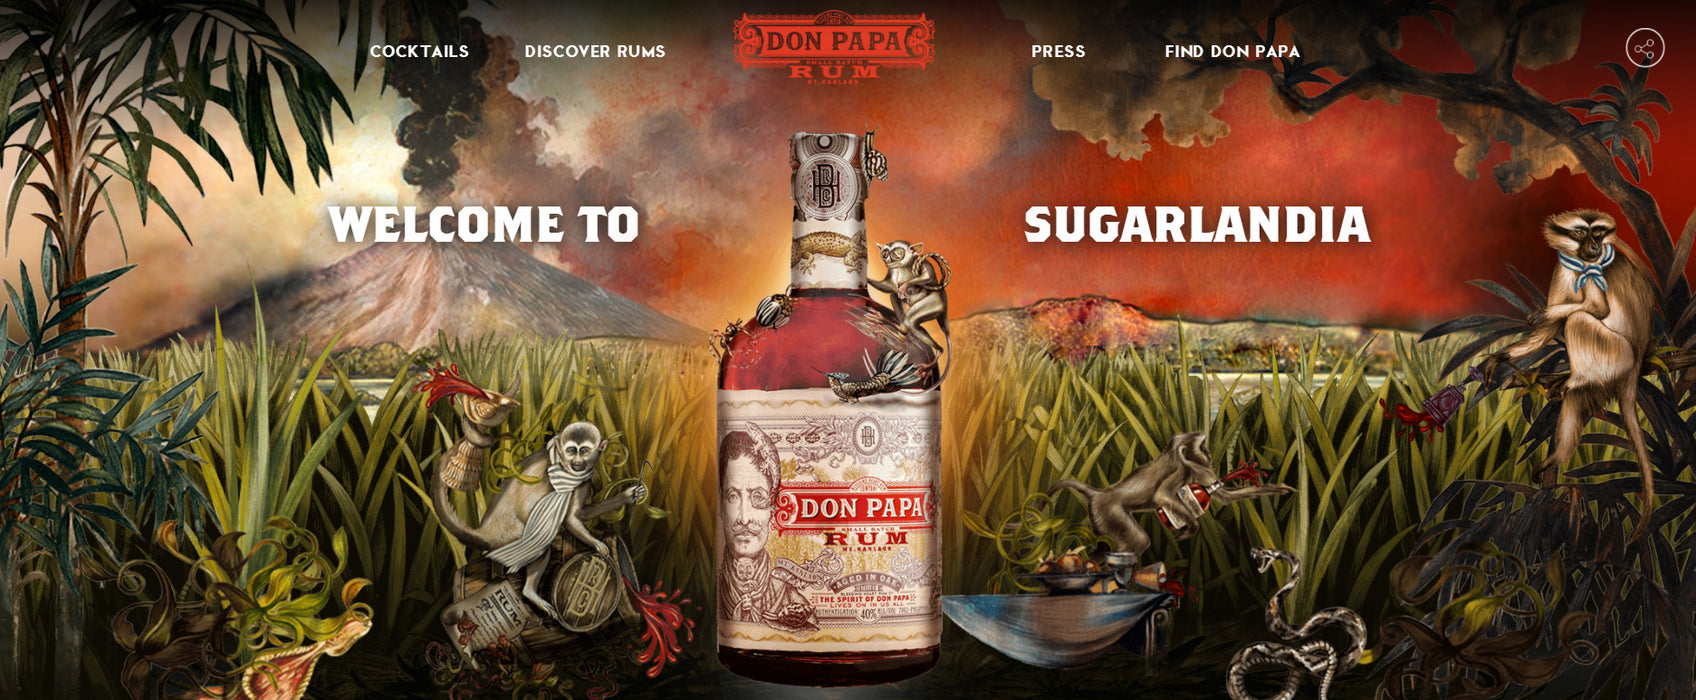 Don Papa 7 Years Old Small Batch Rum 700ml